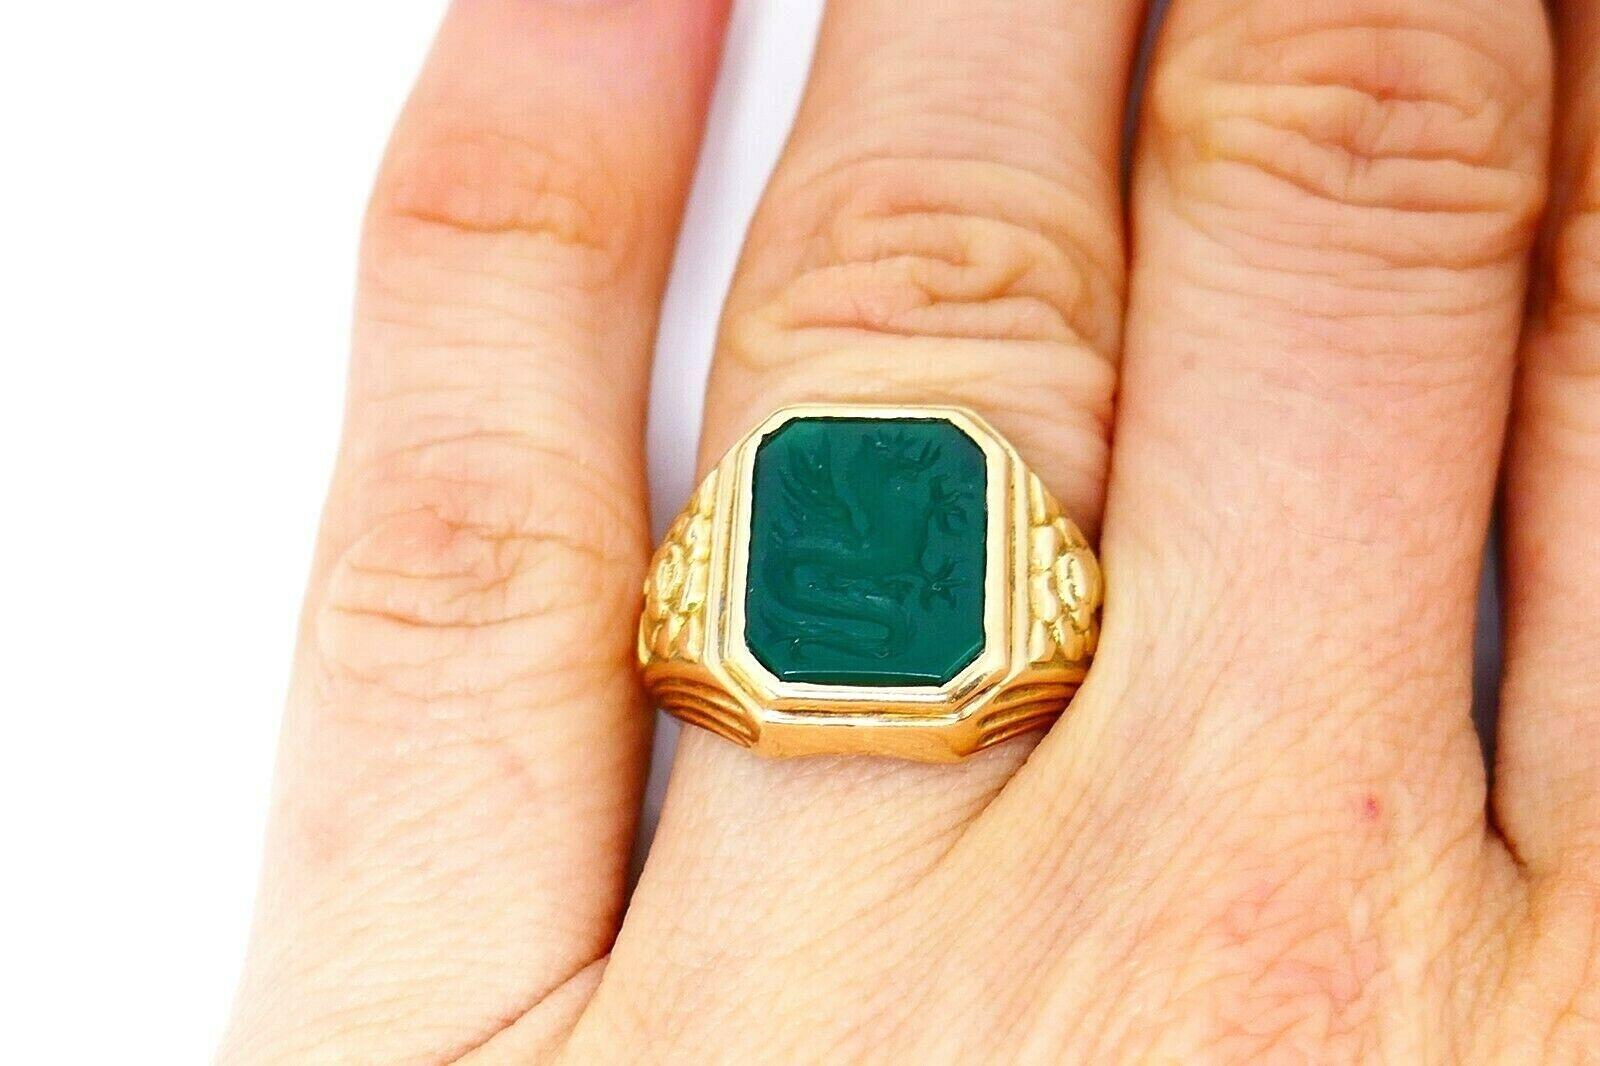 Bailey Banks and Biddle 14k yellow gold signet intaglio ring features chrysoprase with a carved dragon image. The ring has embossed elements on its sides and digits 